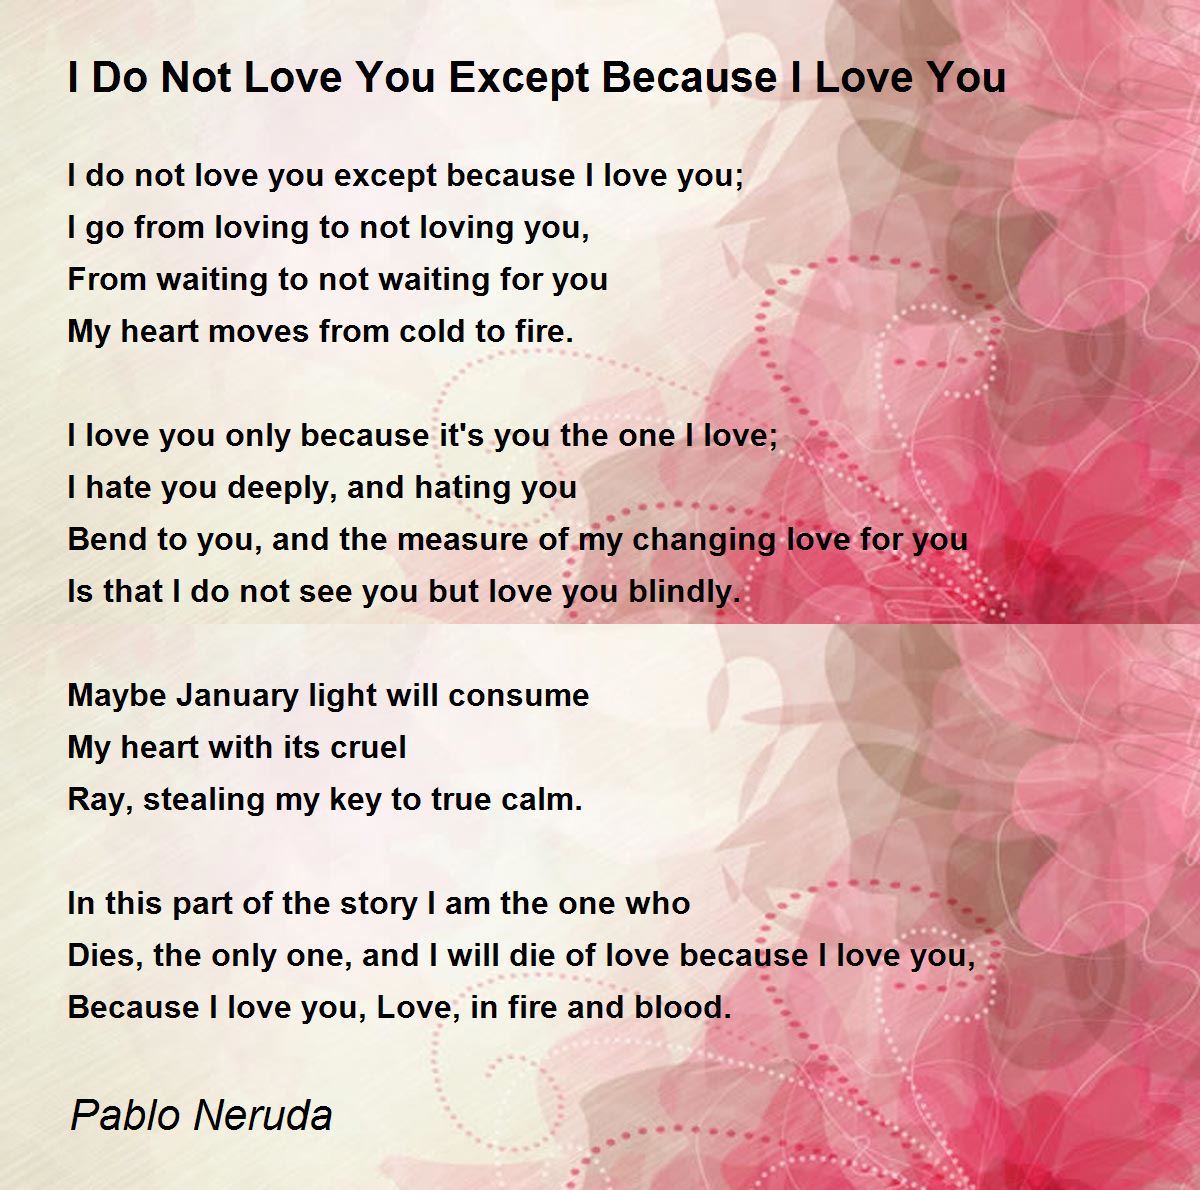 Love poems her why i you much so for I Love